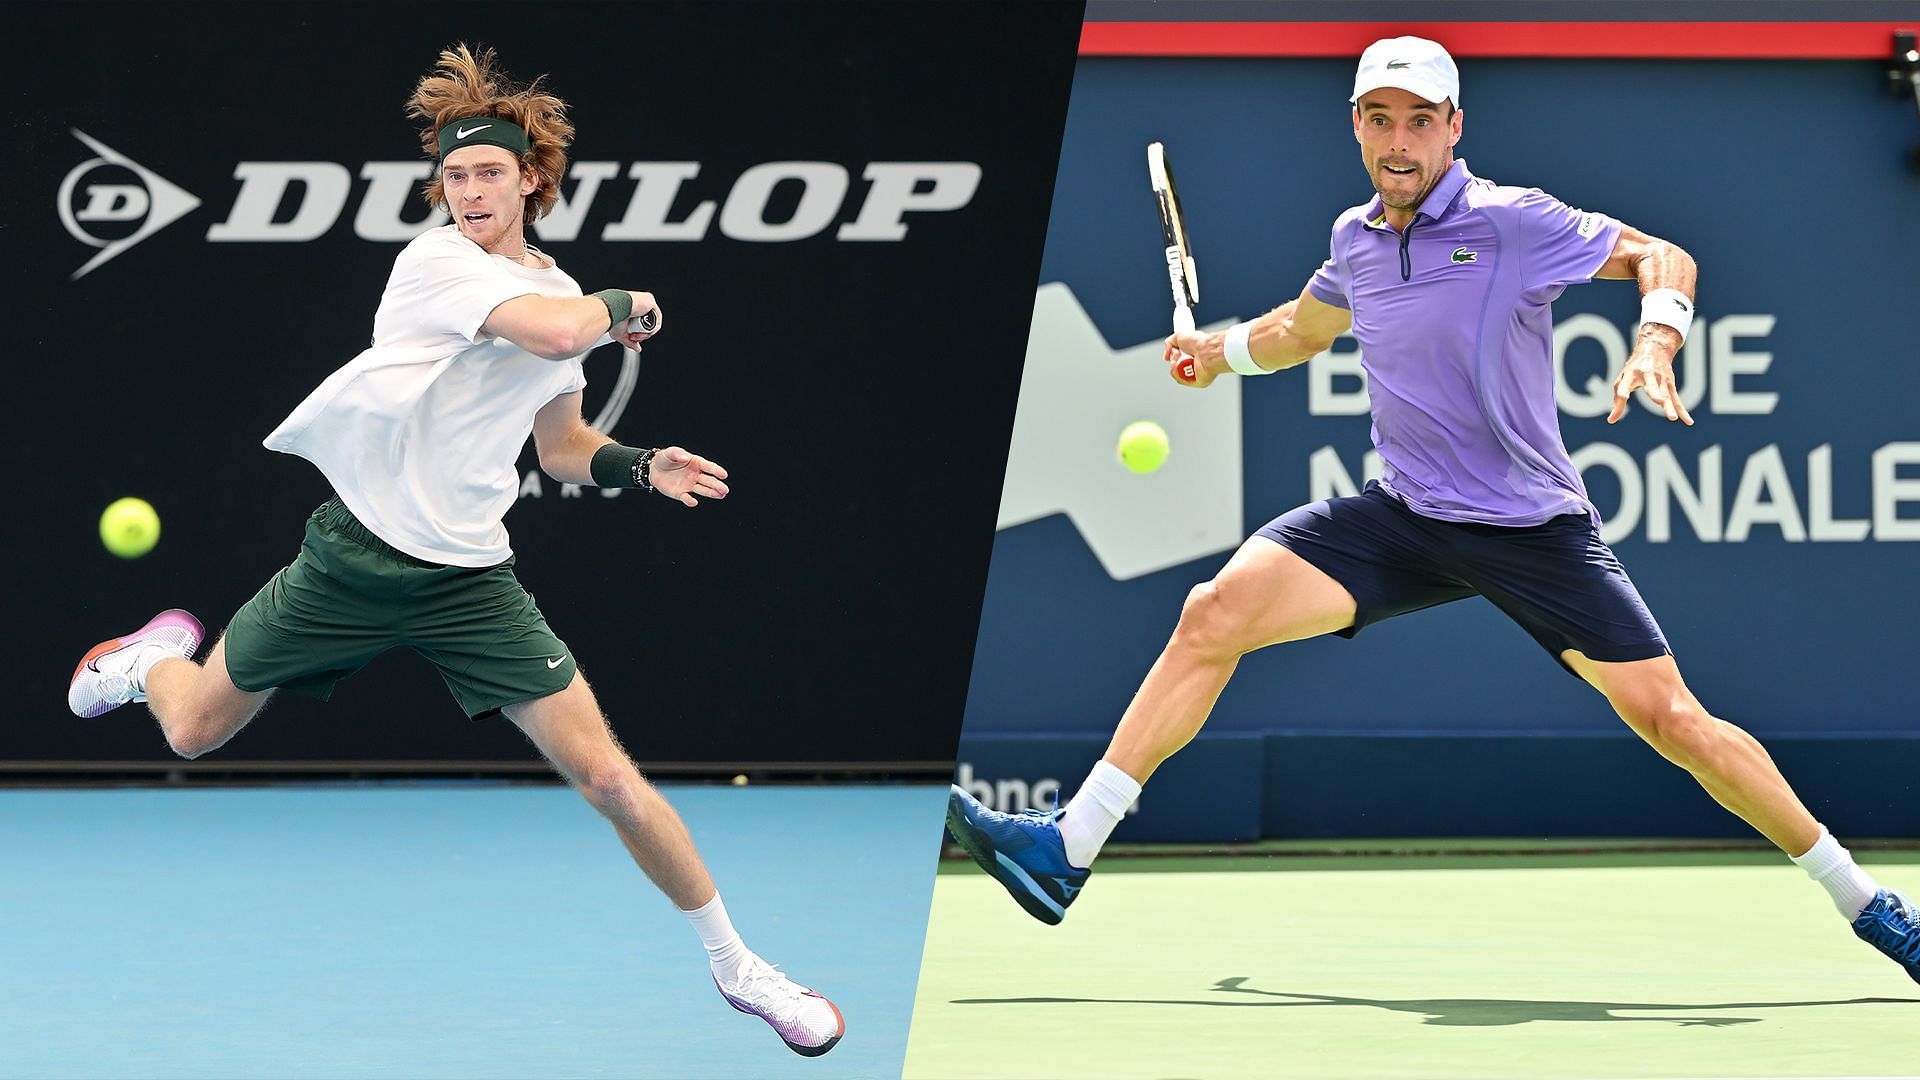 Andrey Rublev will face Roberto Bautista Agut in the first round of the Adelaide International 1